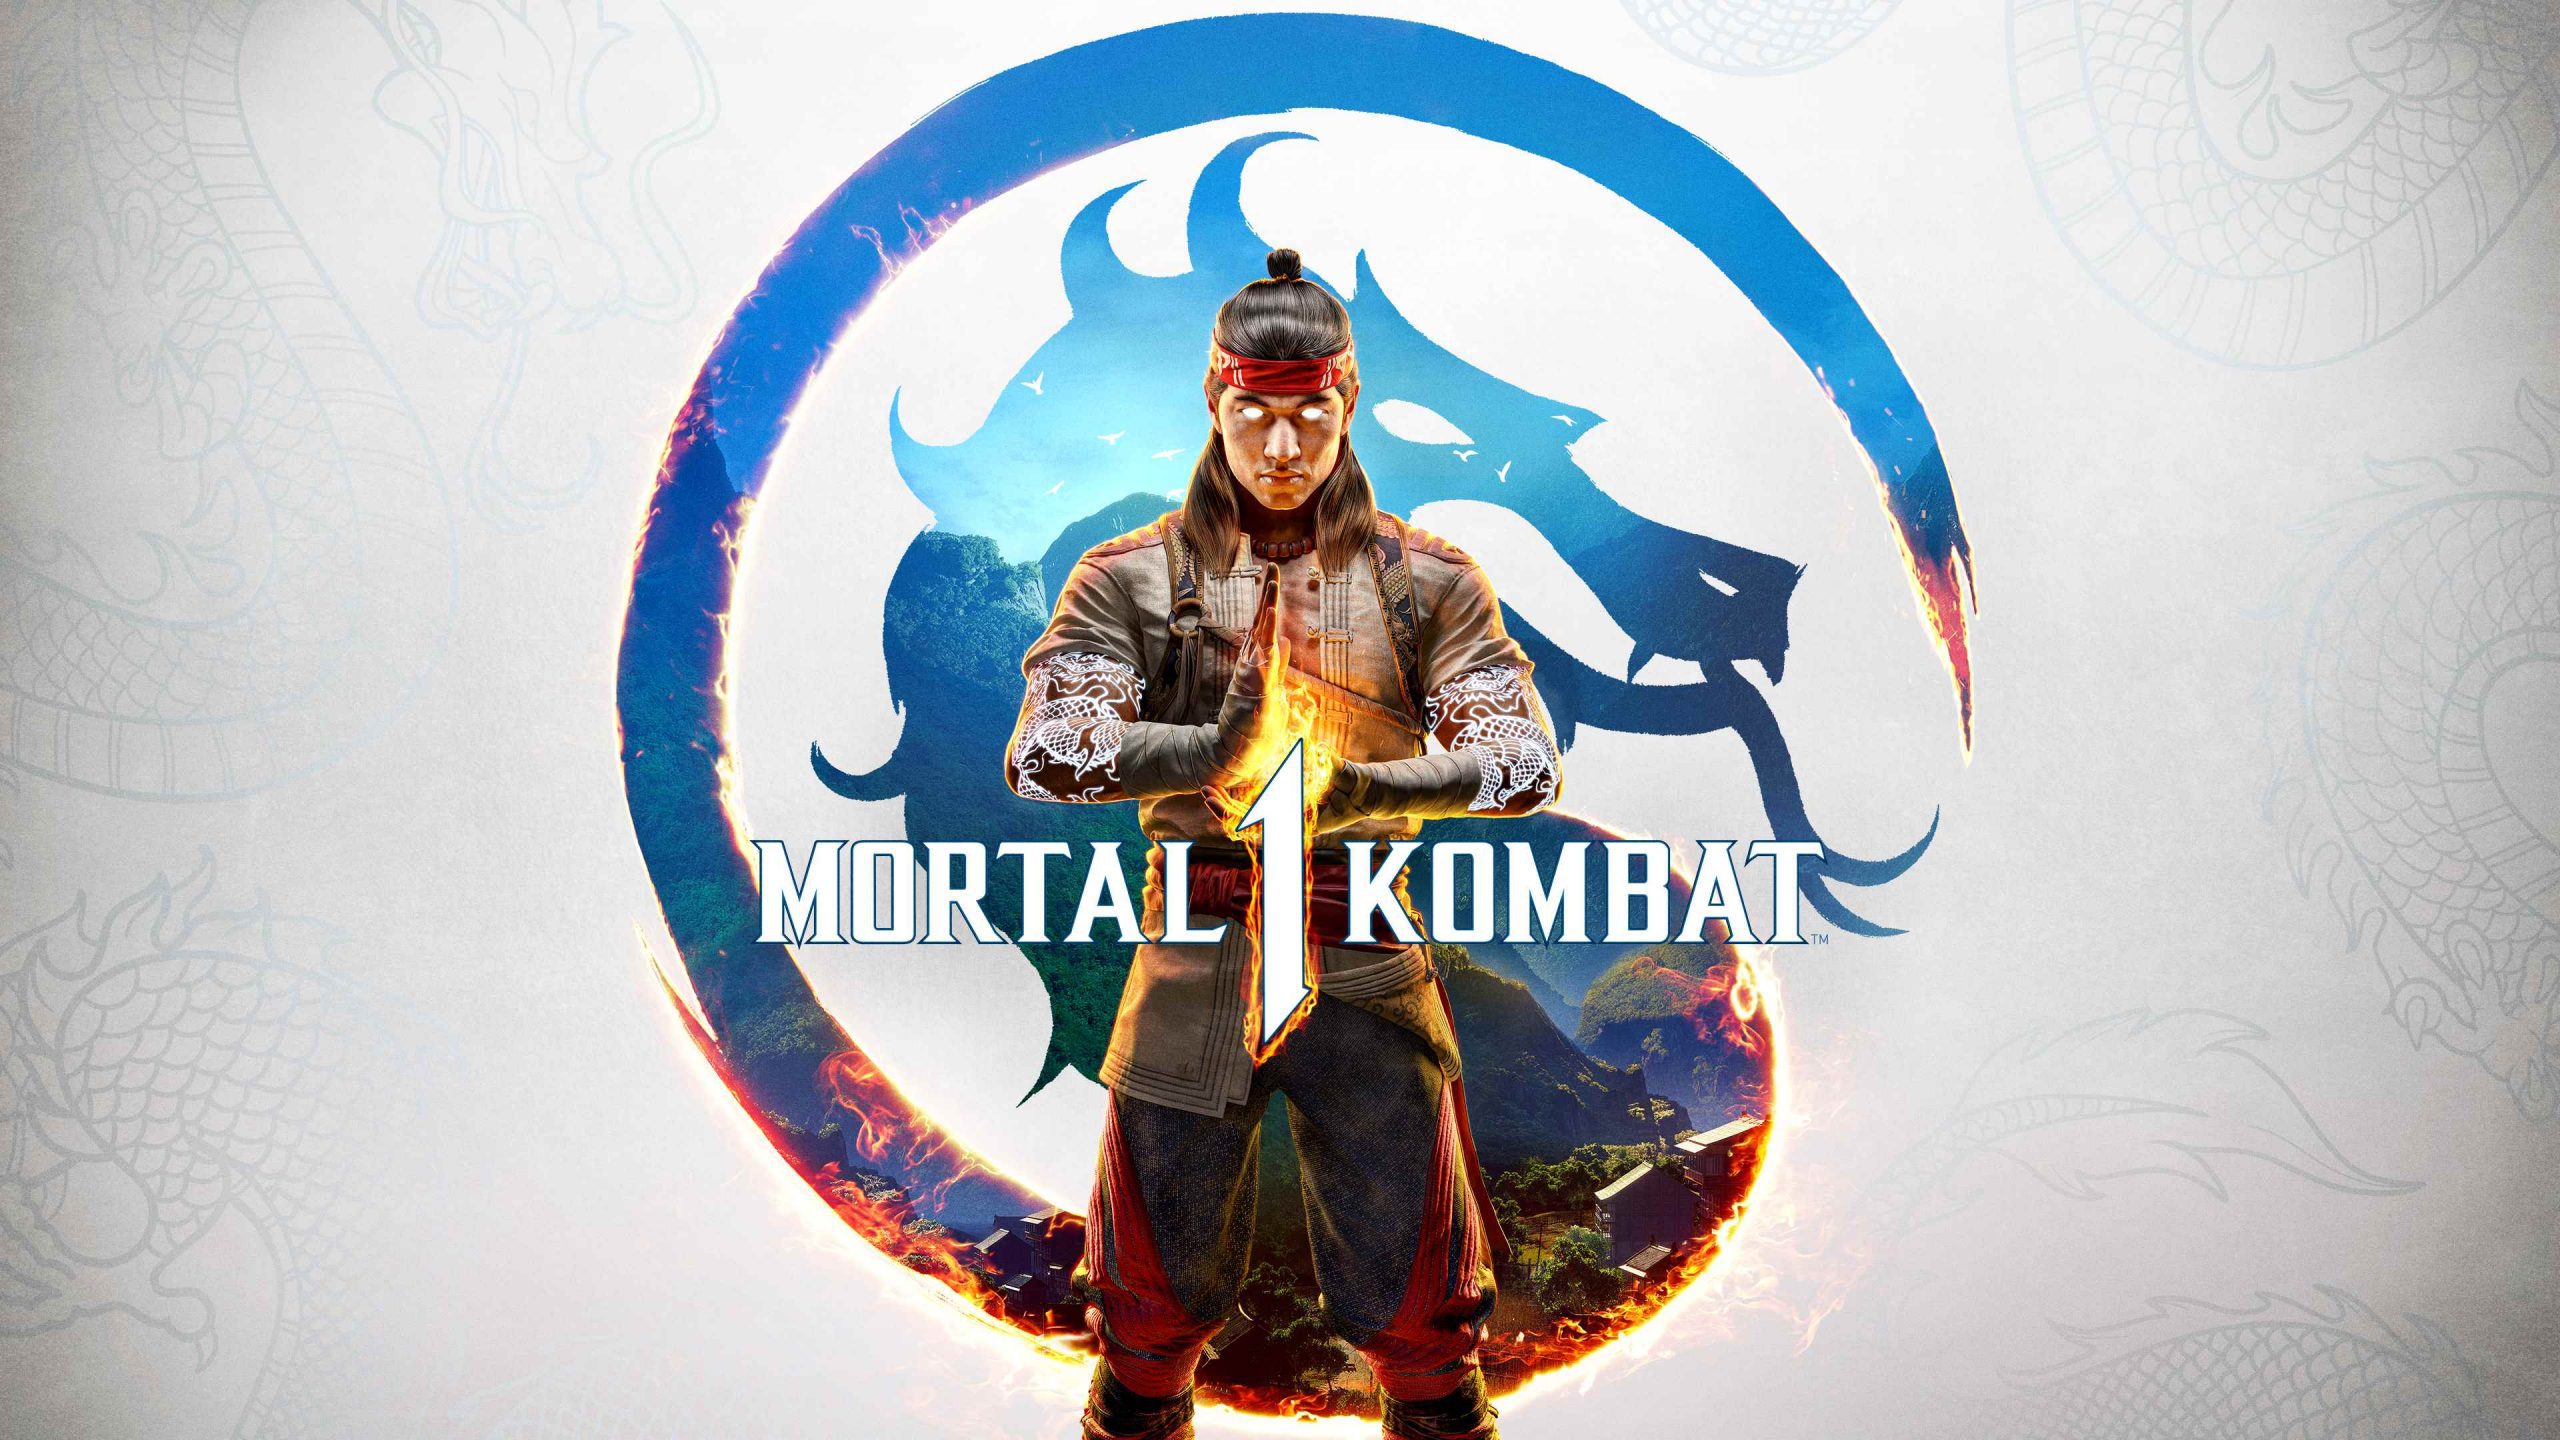 Rebirth of Mortal Kombat: The New Trailer and Fan-Favorite Characters